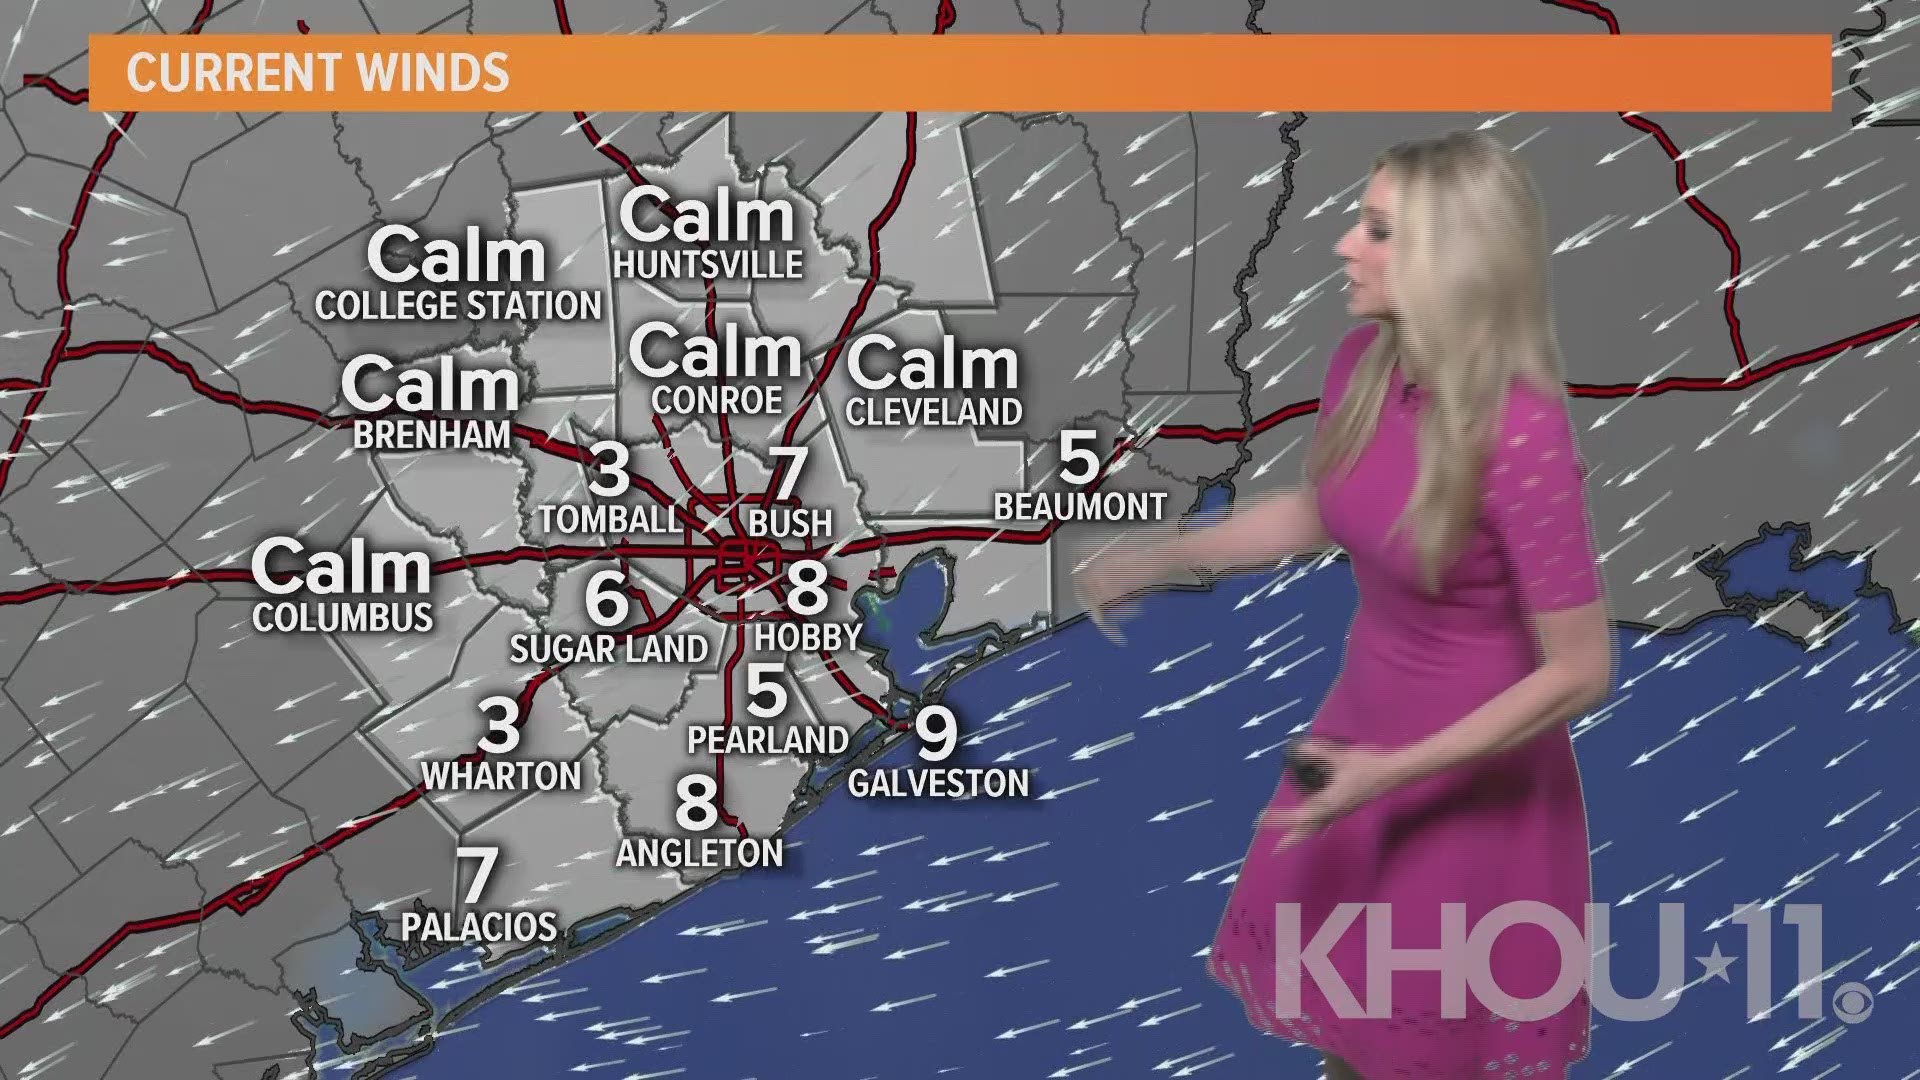 KHOU 11 Meteorologist Chita Craft is tracking the wind and where the plume from the ITC La Porte fire will end up on Tuesday, March 19, 2019.